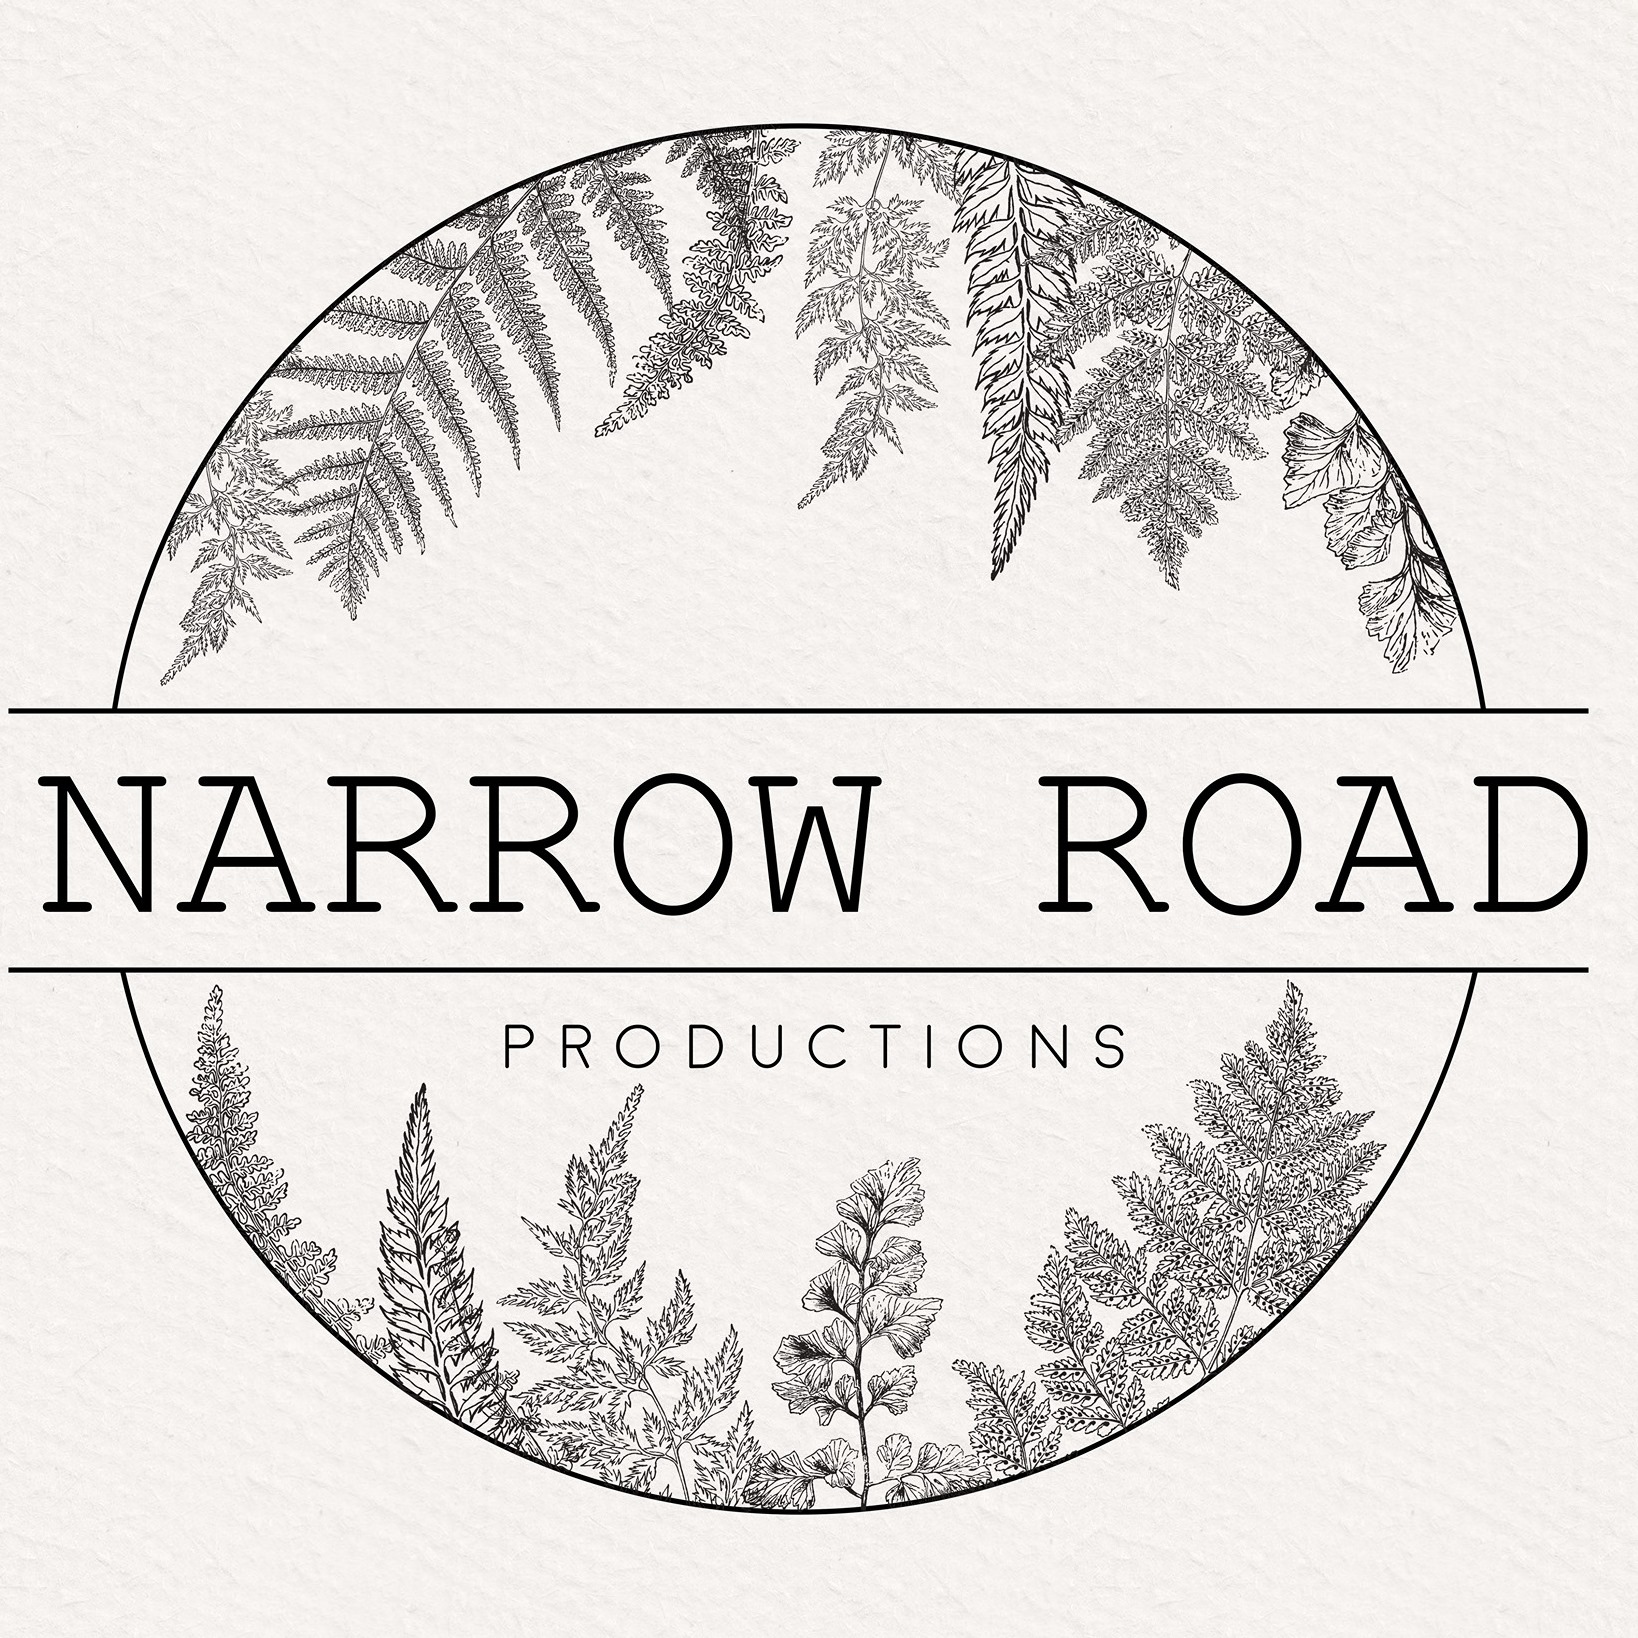 Business logo of Narrow Road Productions